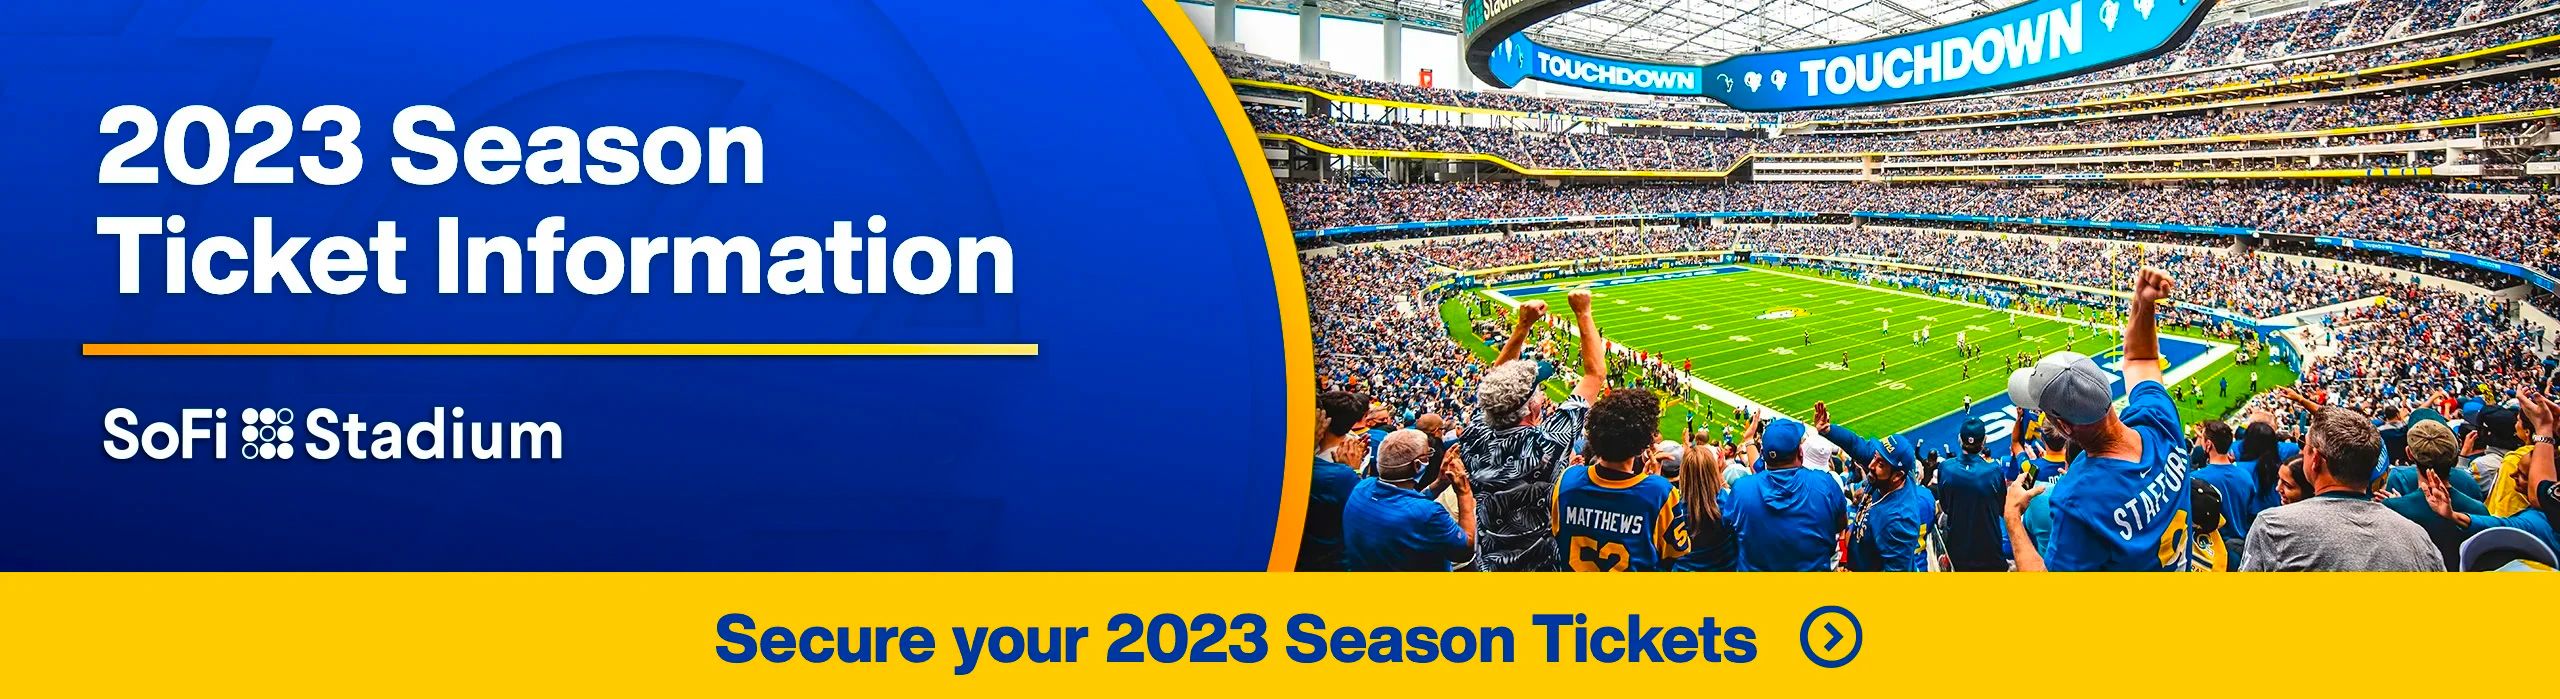 rams tickets price